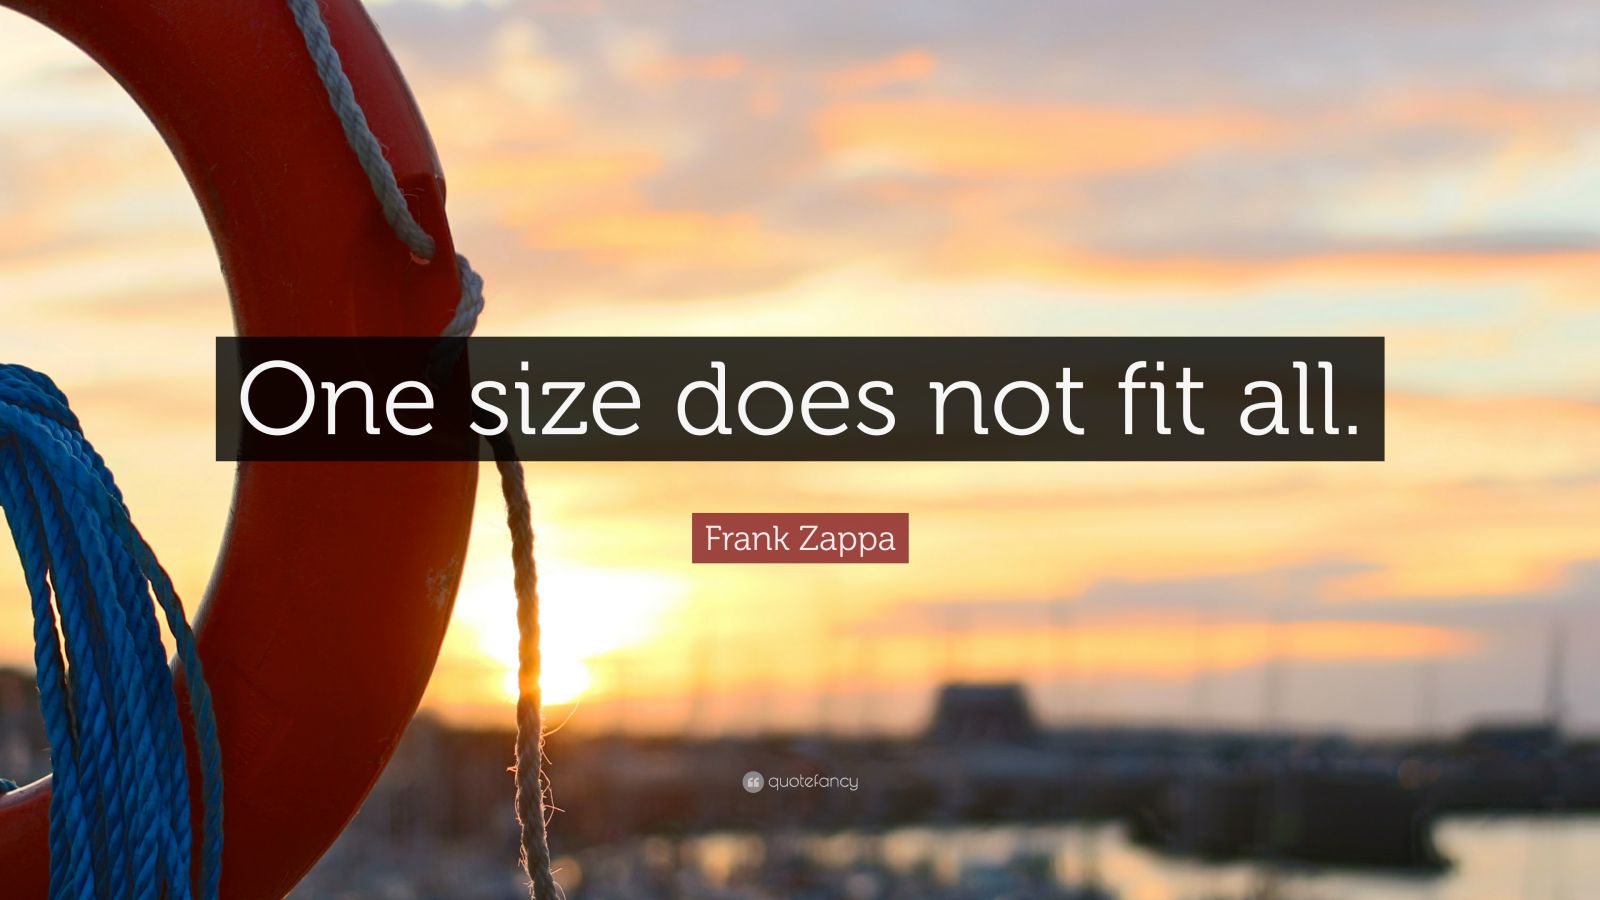 Frank Zappa Quote “one Size Does Not Fit All” 12 Wallpapers